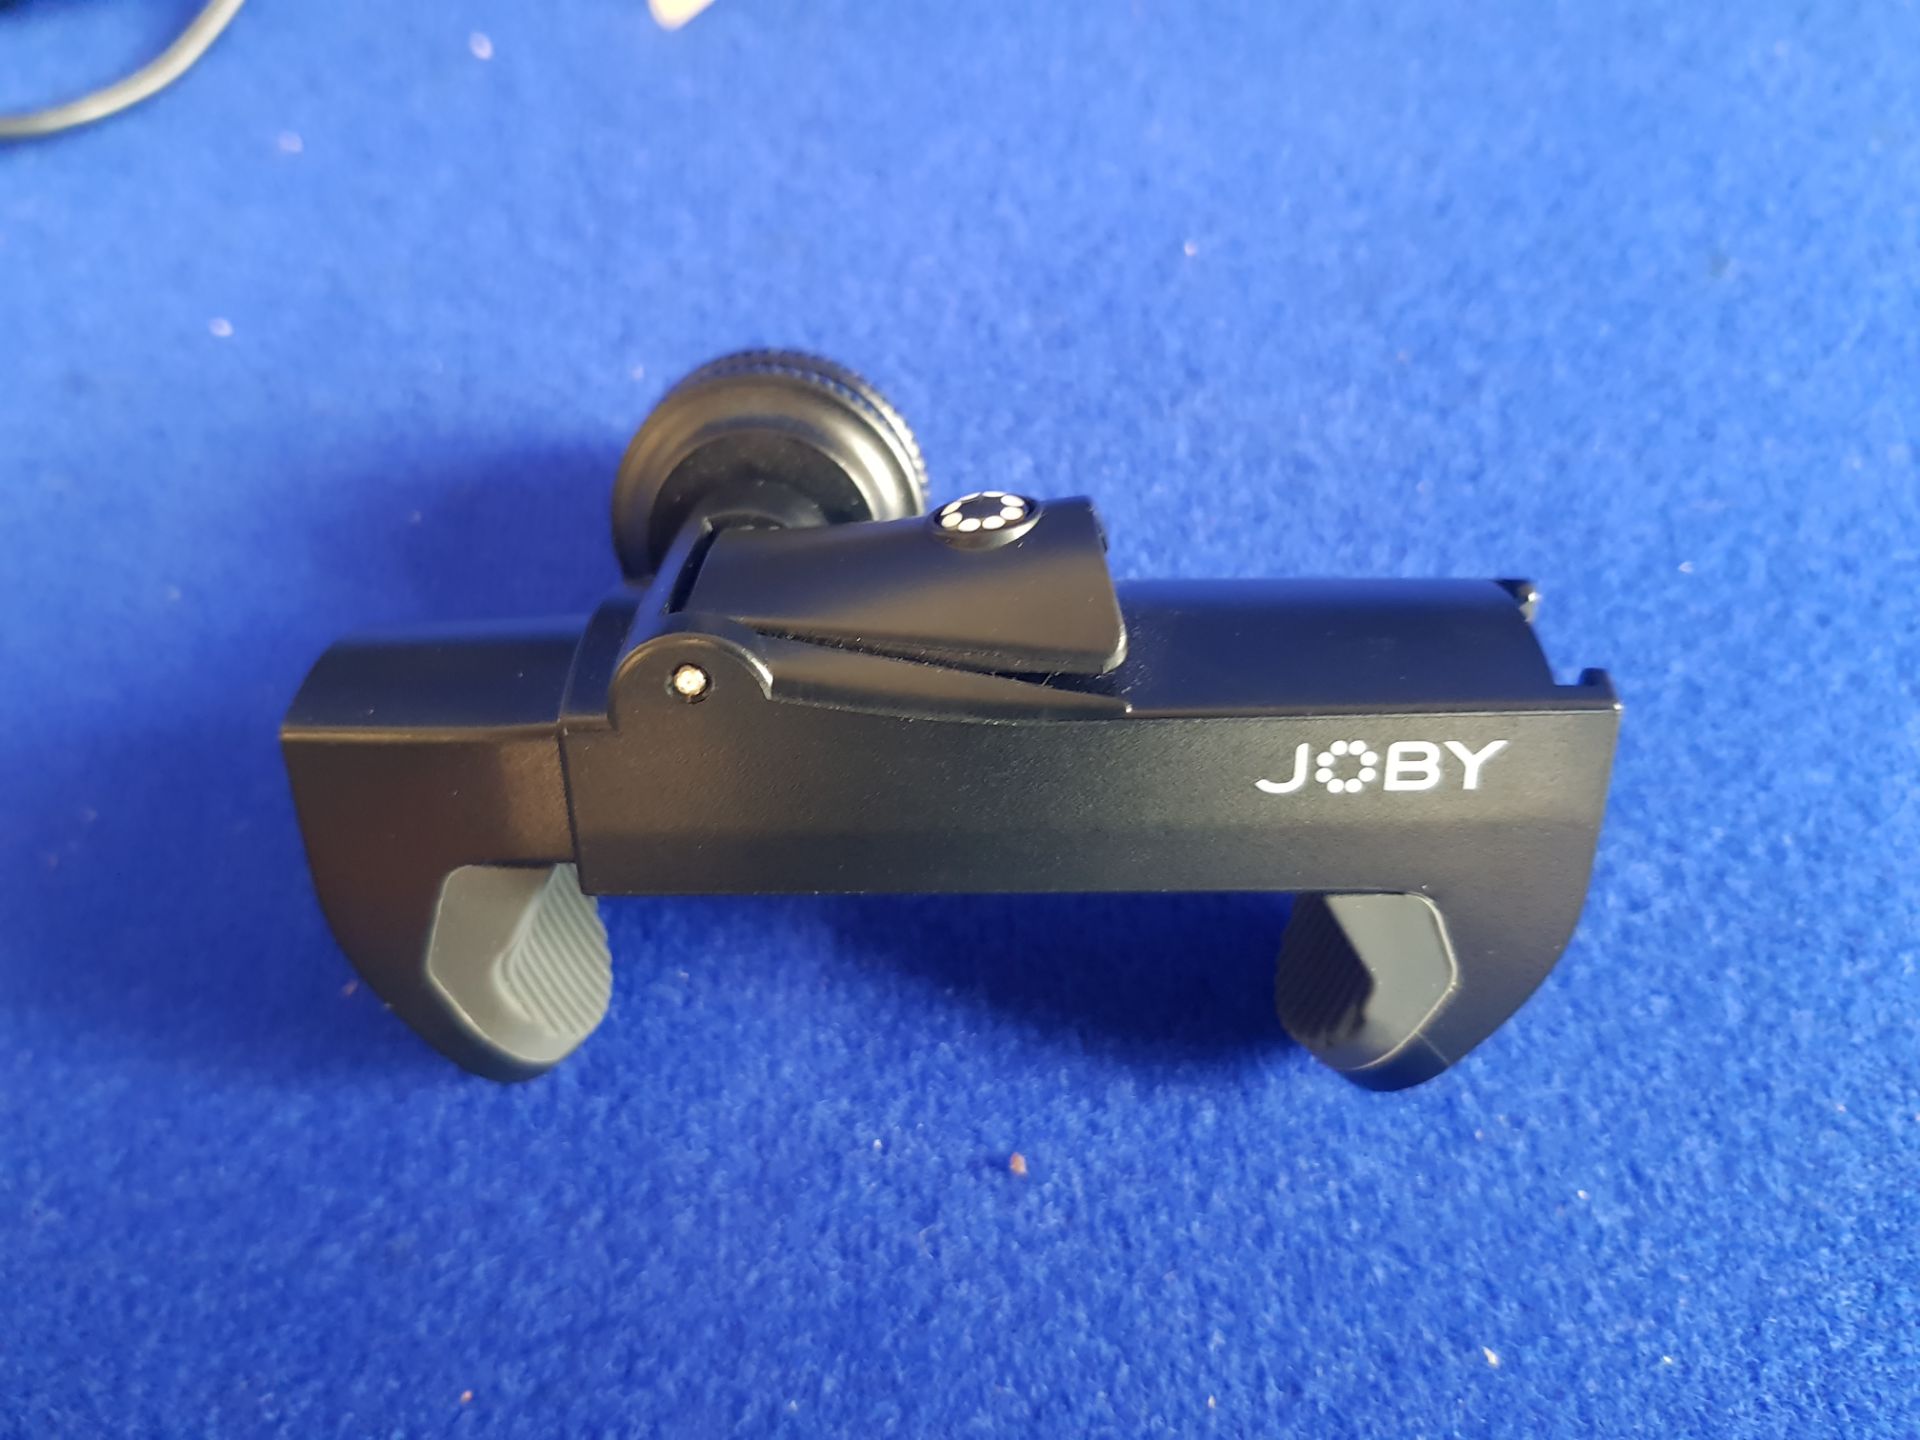 3x Logitech Web Cams And Joby Cam Holder - Image 3 of 3